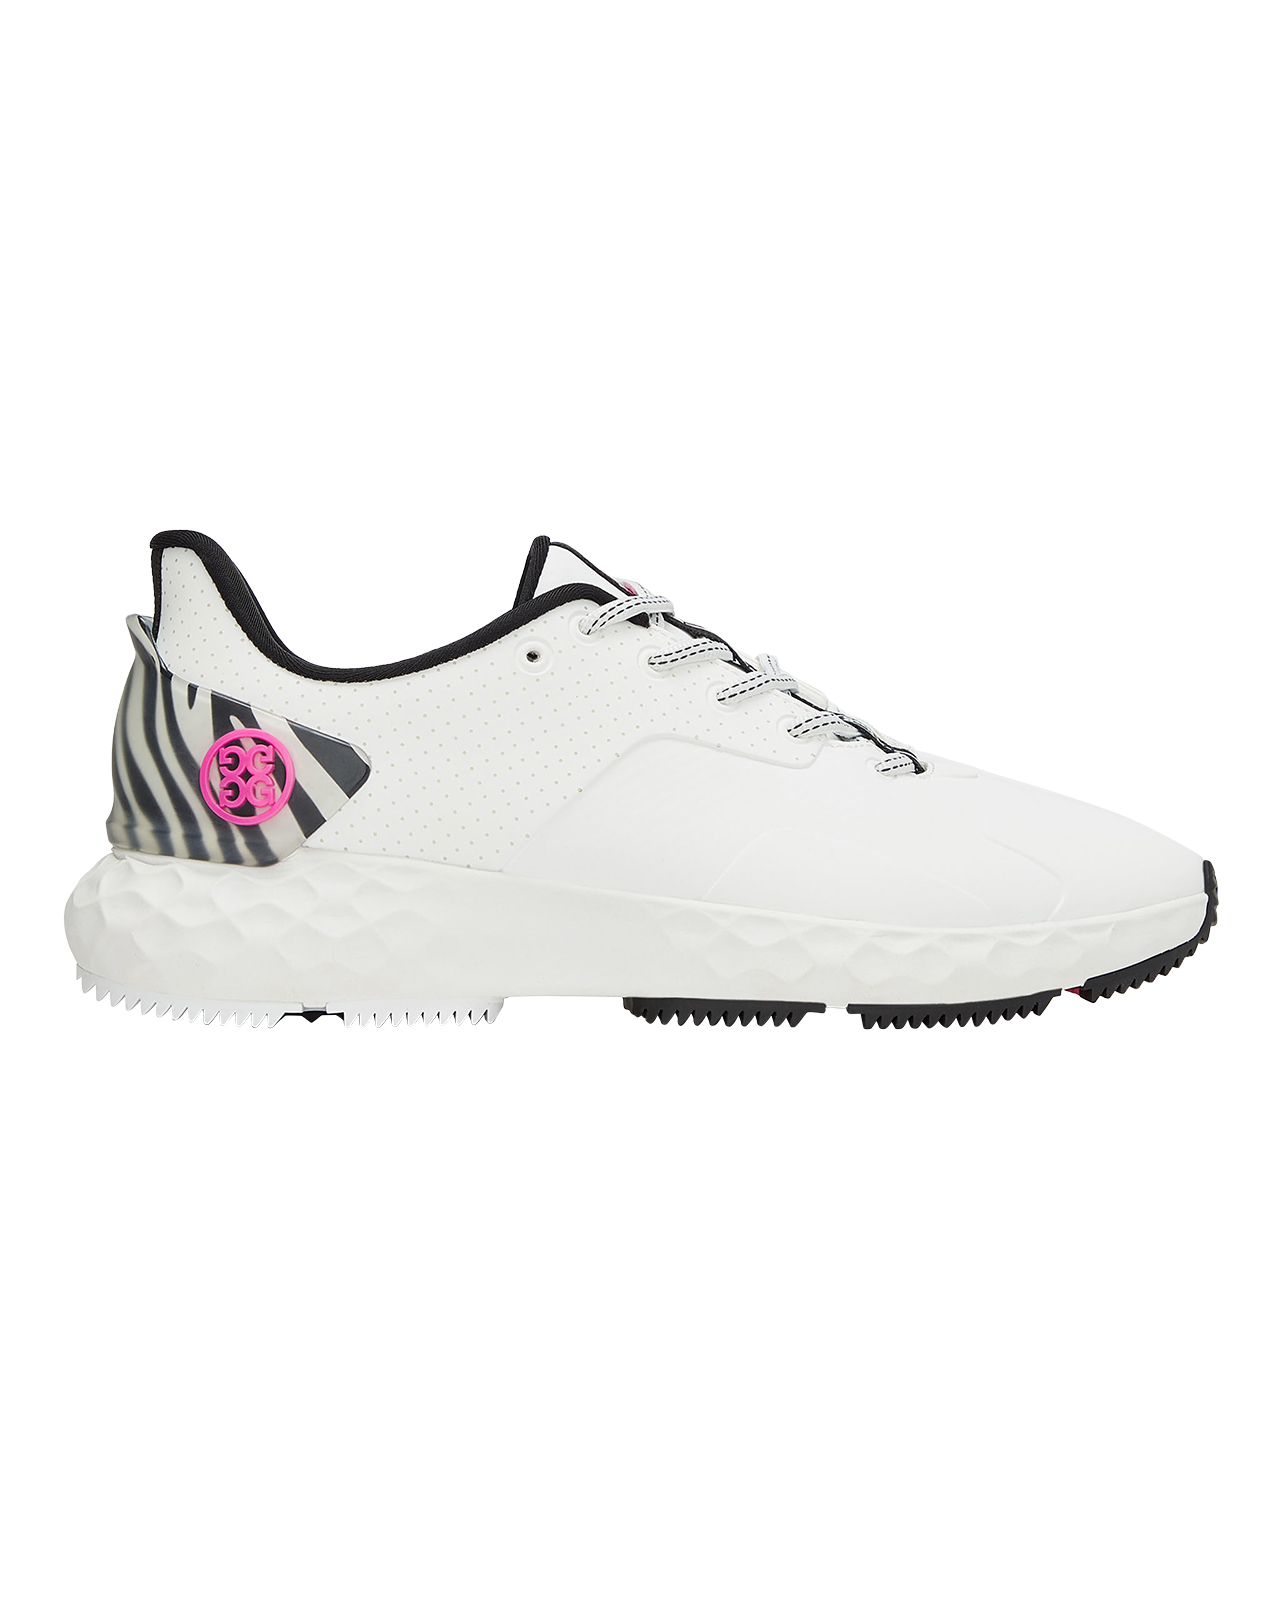 Perforated Zebra Accent MG4+, Dames - snow